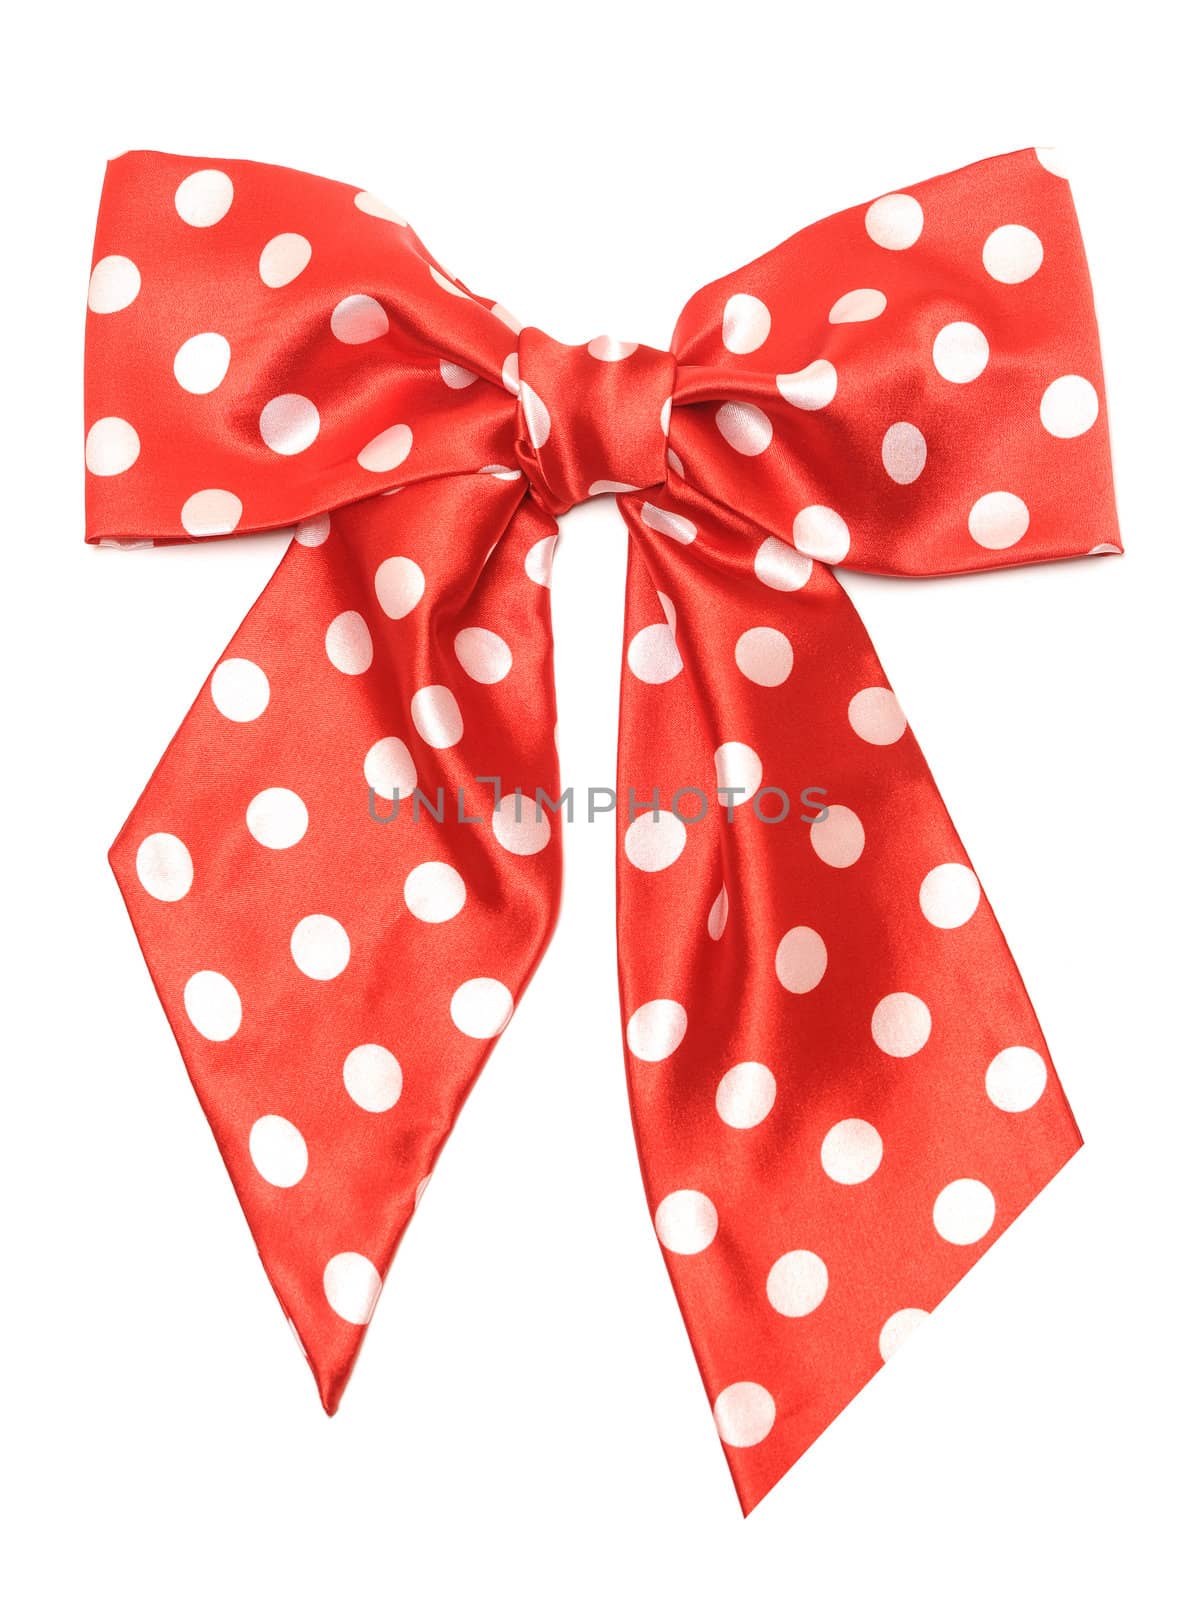 dotted red satin gift bow isolated on white by inxti